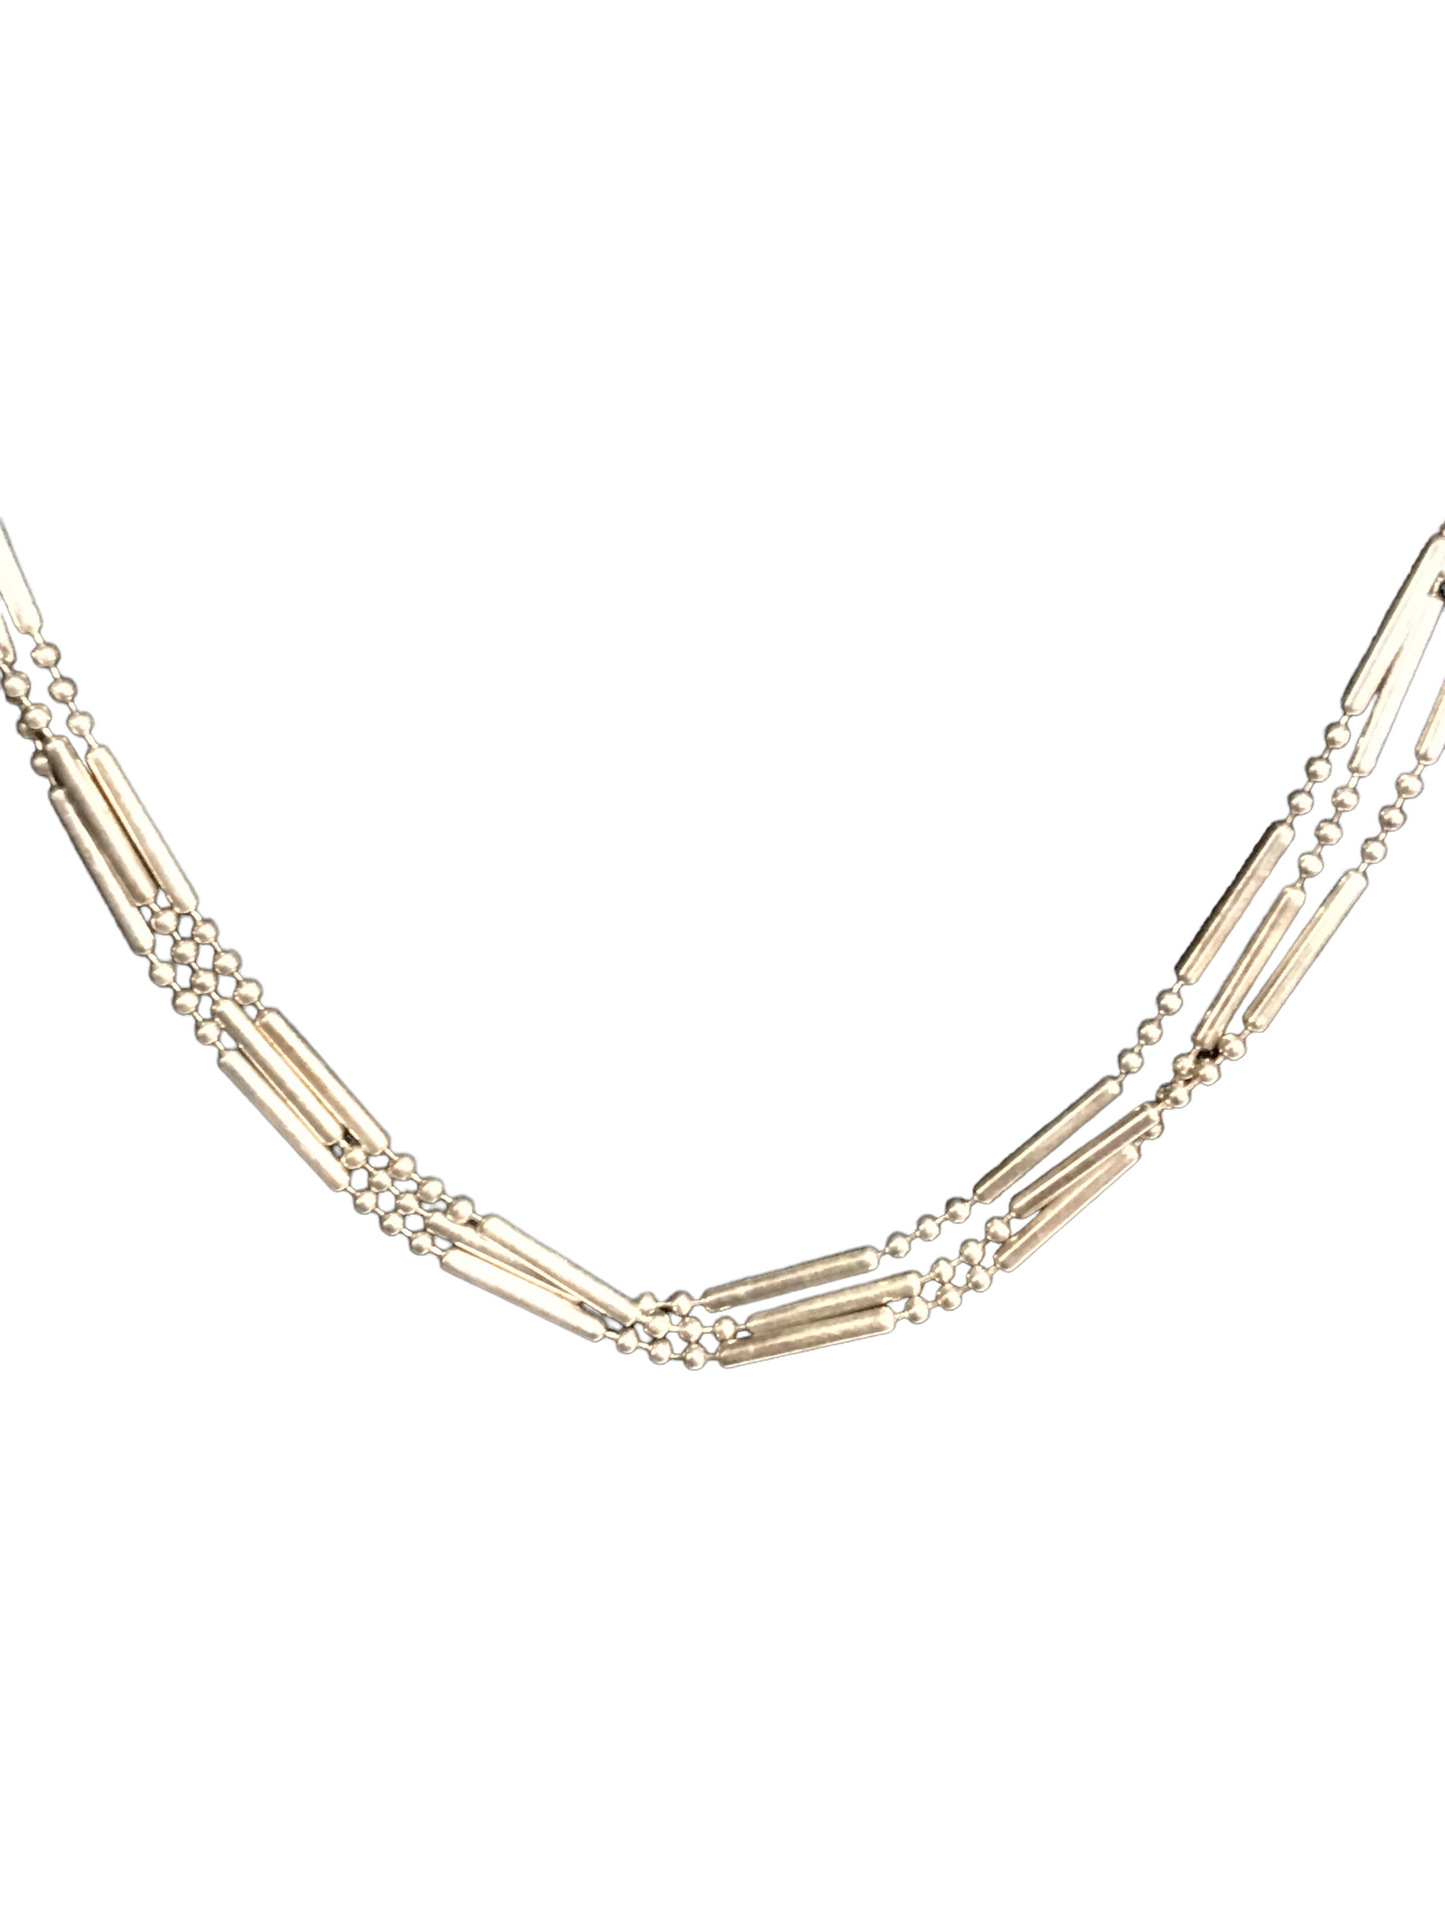 925 Sterling Silver 3 Strand Beads Chain (19 Inches)